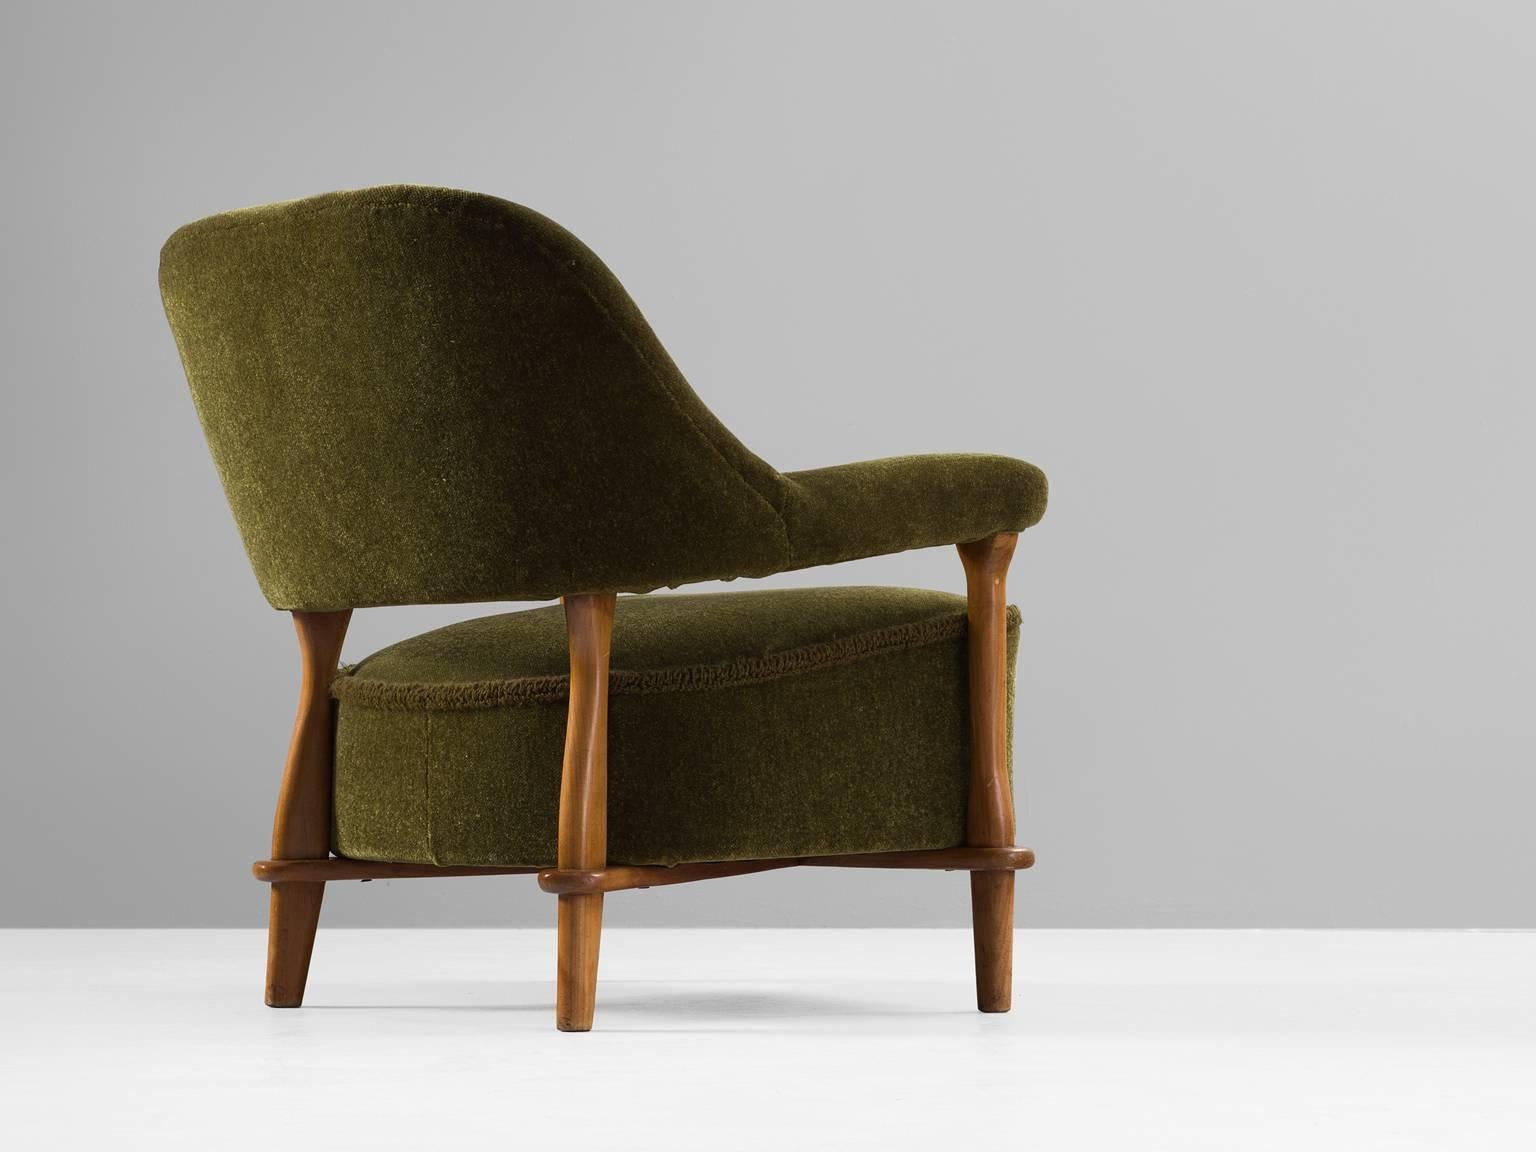 Armchair, velvet and oak, 1950s.

This moss green voluptuous armchair by Theo Ruth (1915-) is a very strong singular item. The back flows with a natural grace into the armrest. The open gap between the backrest and the seating gives the chair a